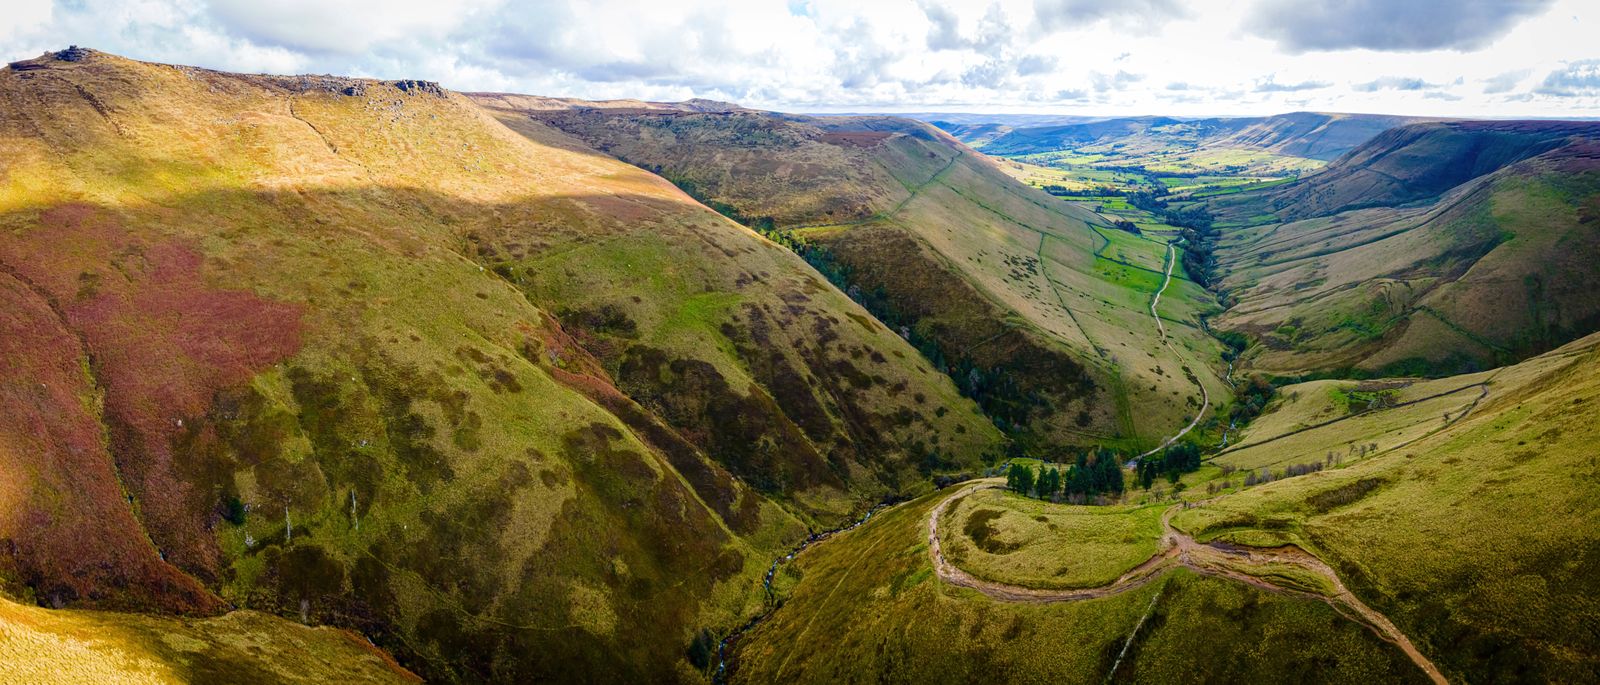 A panoramic view from Kinder Scout. Photo: Getty.